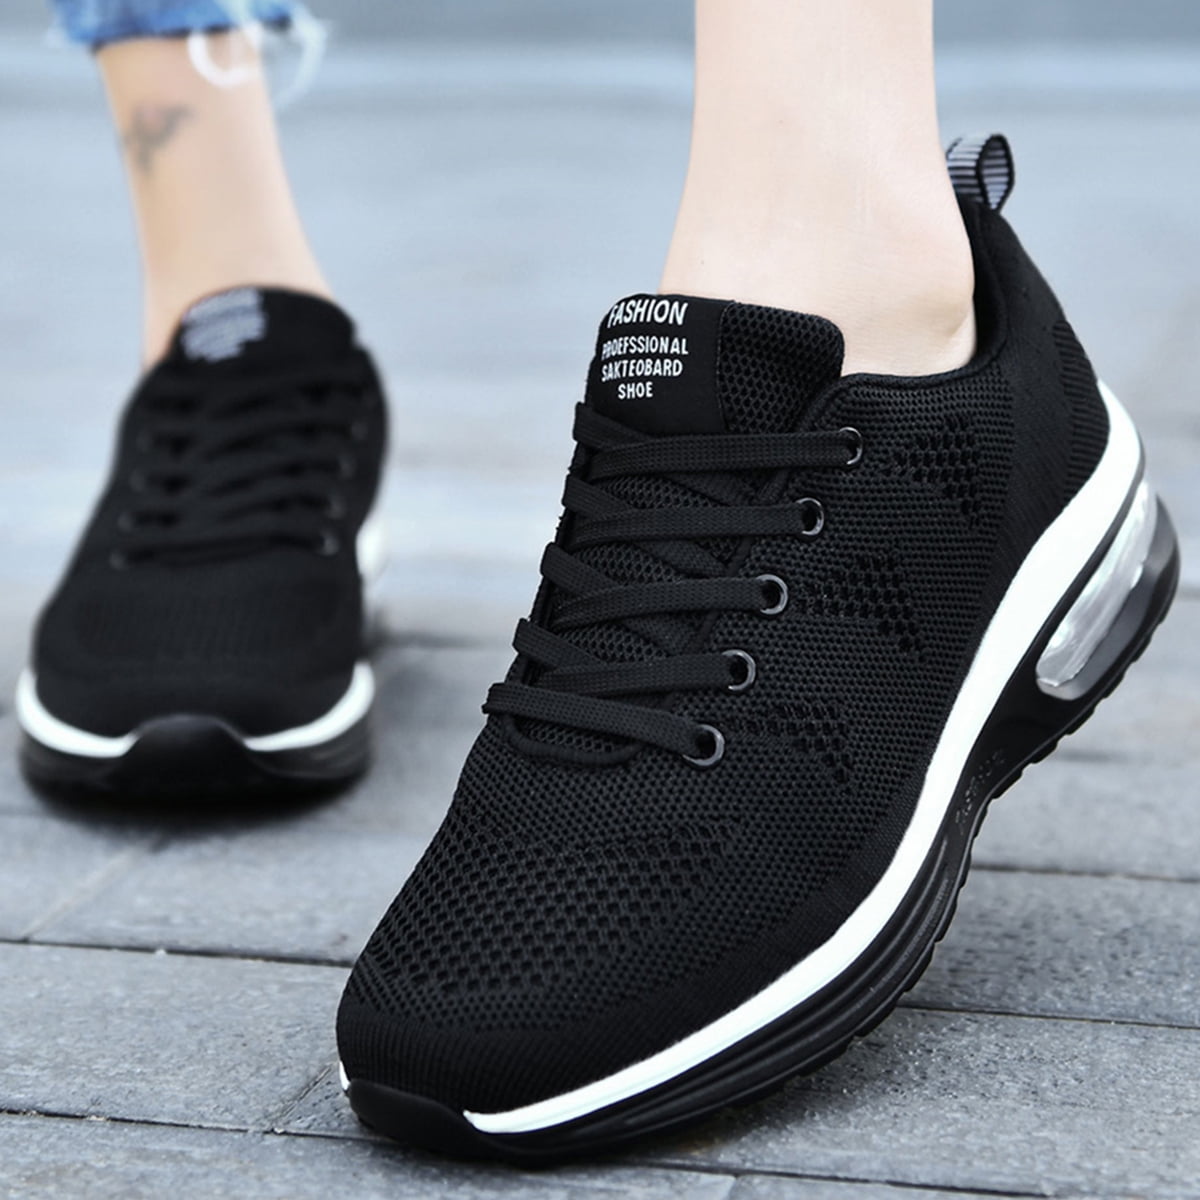 Tvtaop Women Sport Shoes Casual Atheltic Running Walking Shoes Fashion ...